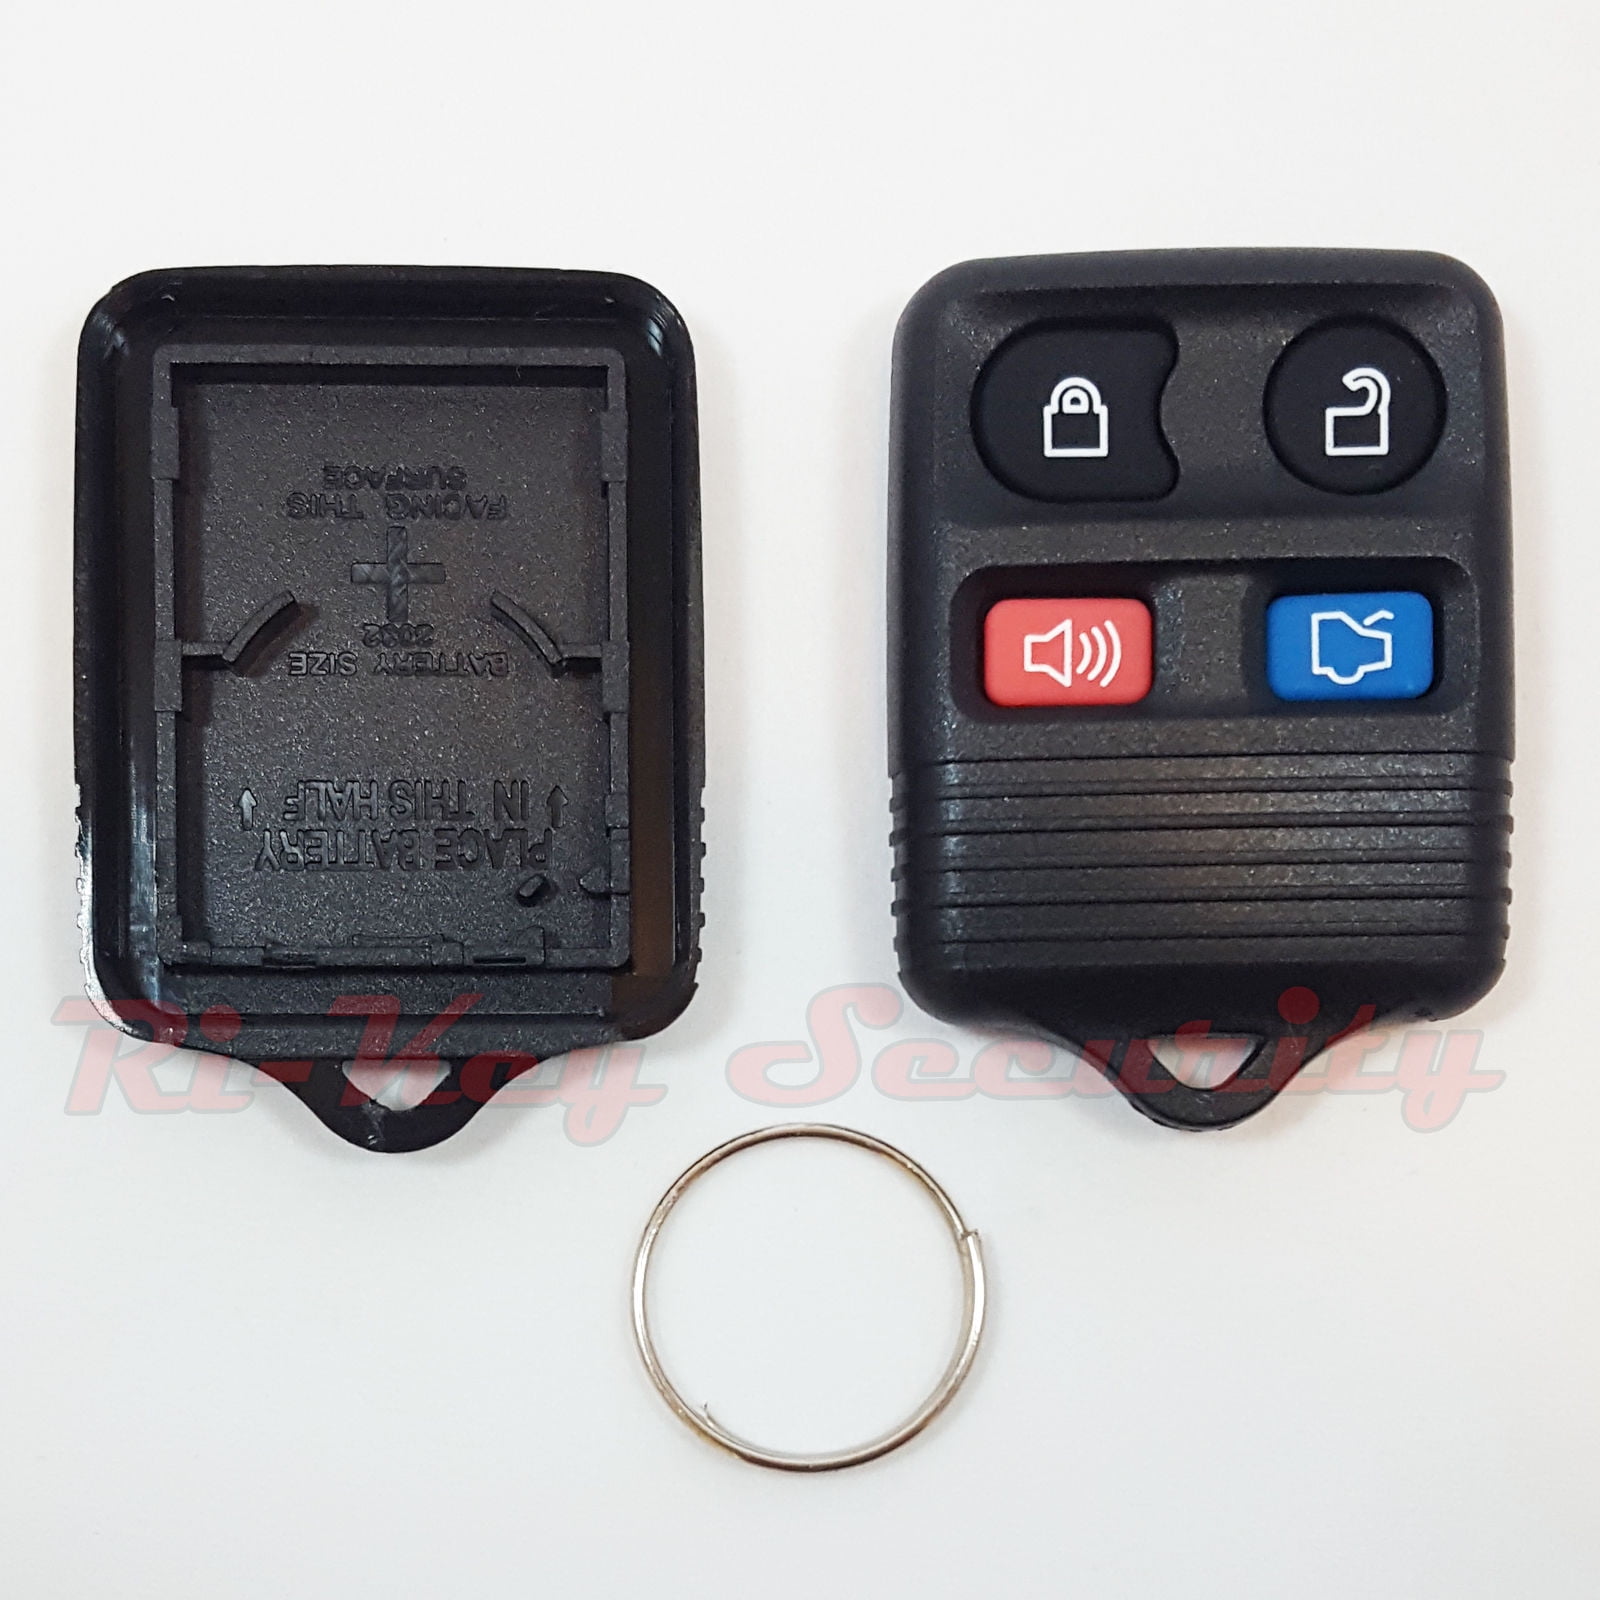 New 4 Buttons Replacement Keyless Alarm Remote Shell Fob Key Case Pad for Ford 